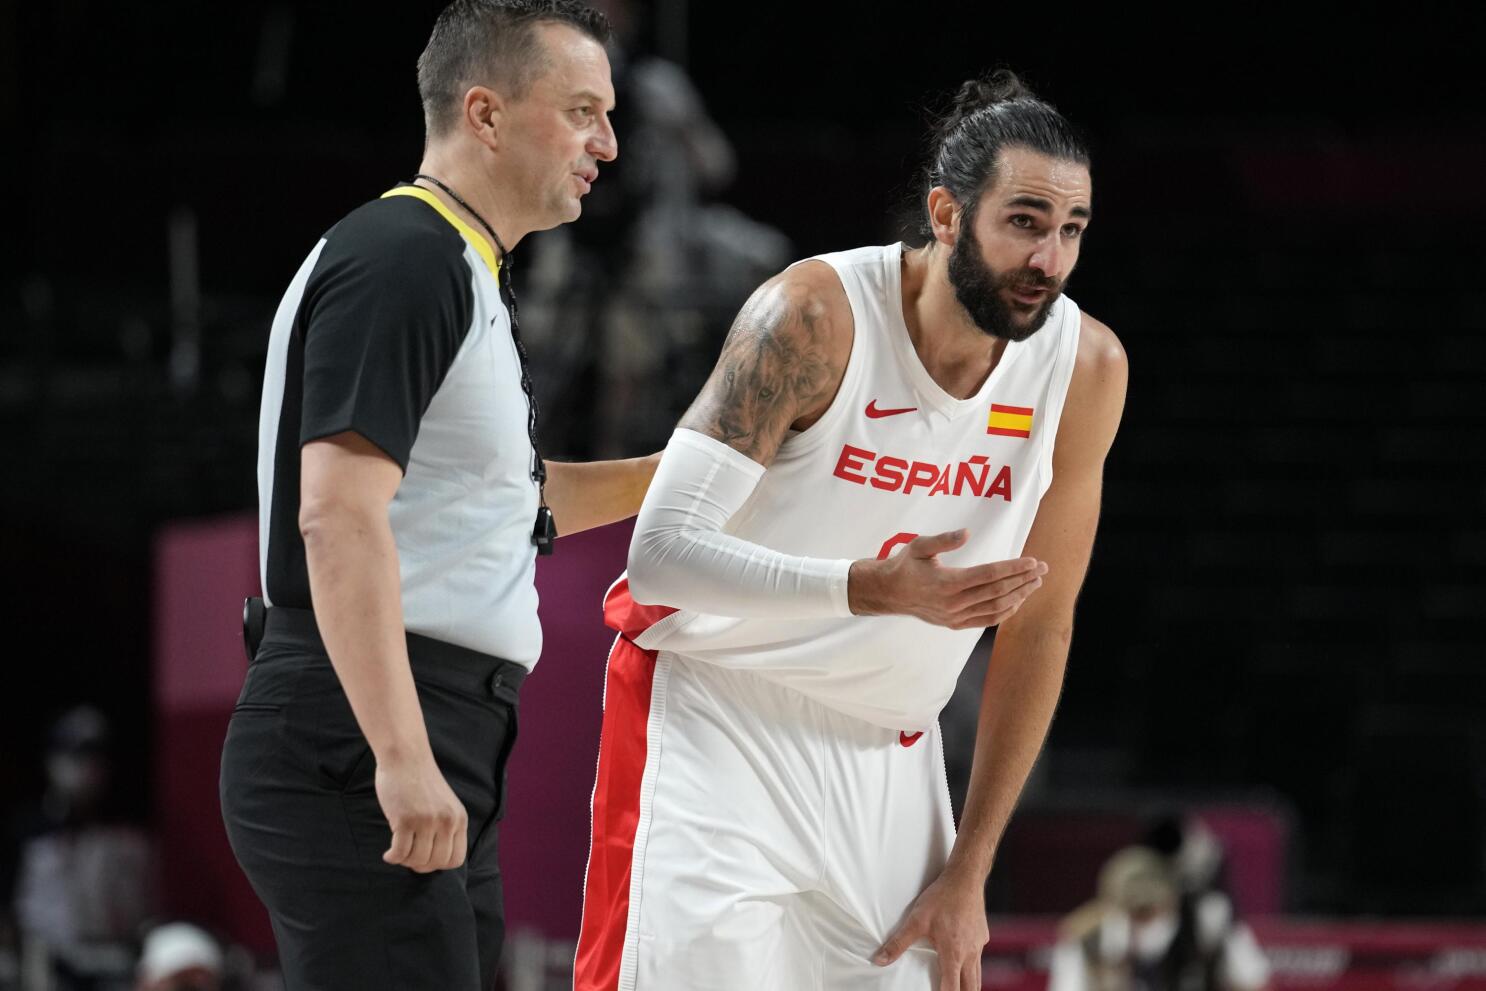 Report: Guard Ricky Rubio agrees to 3-year deal with Cleveland Cavs